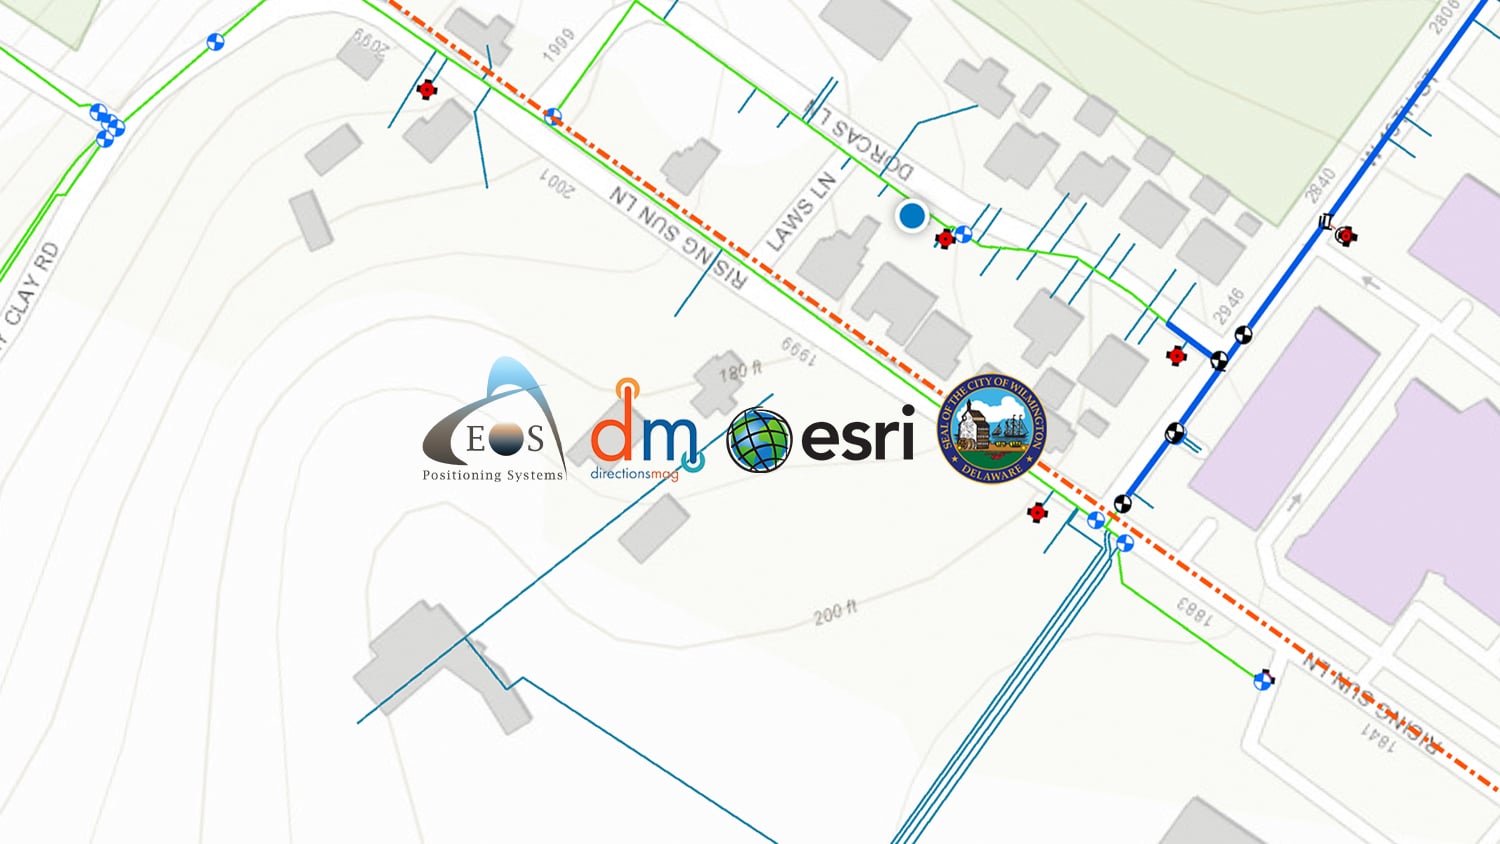 Eos Arrow GNSS Webinar Recording with Directions Magazine - Using High-Accuracy Arrow GNSS in Esri's ArcGIS Field Maps